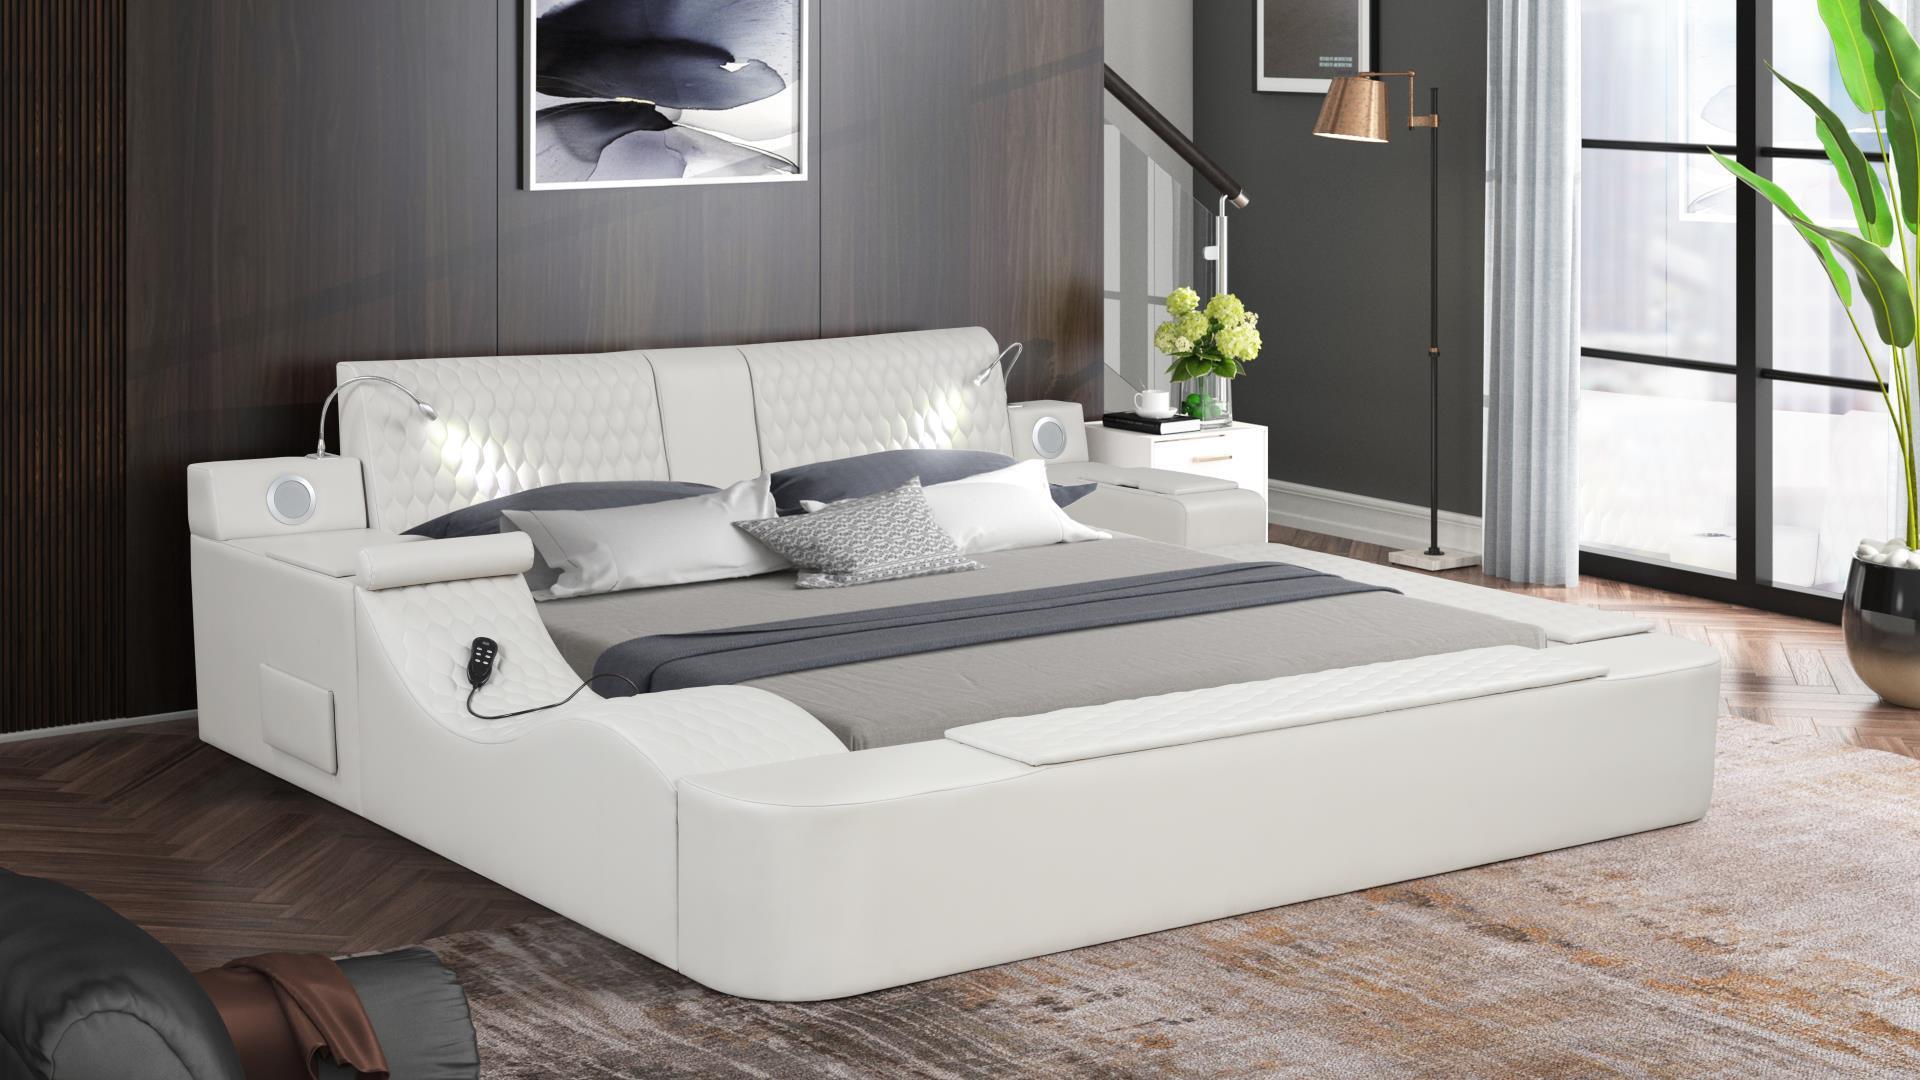 

    
Ice Eco Leather Smart Multifunctional Queen Bed ZOYA Galaxy Home Contemporary
